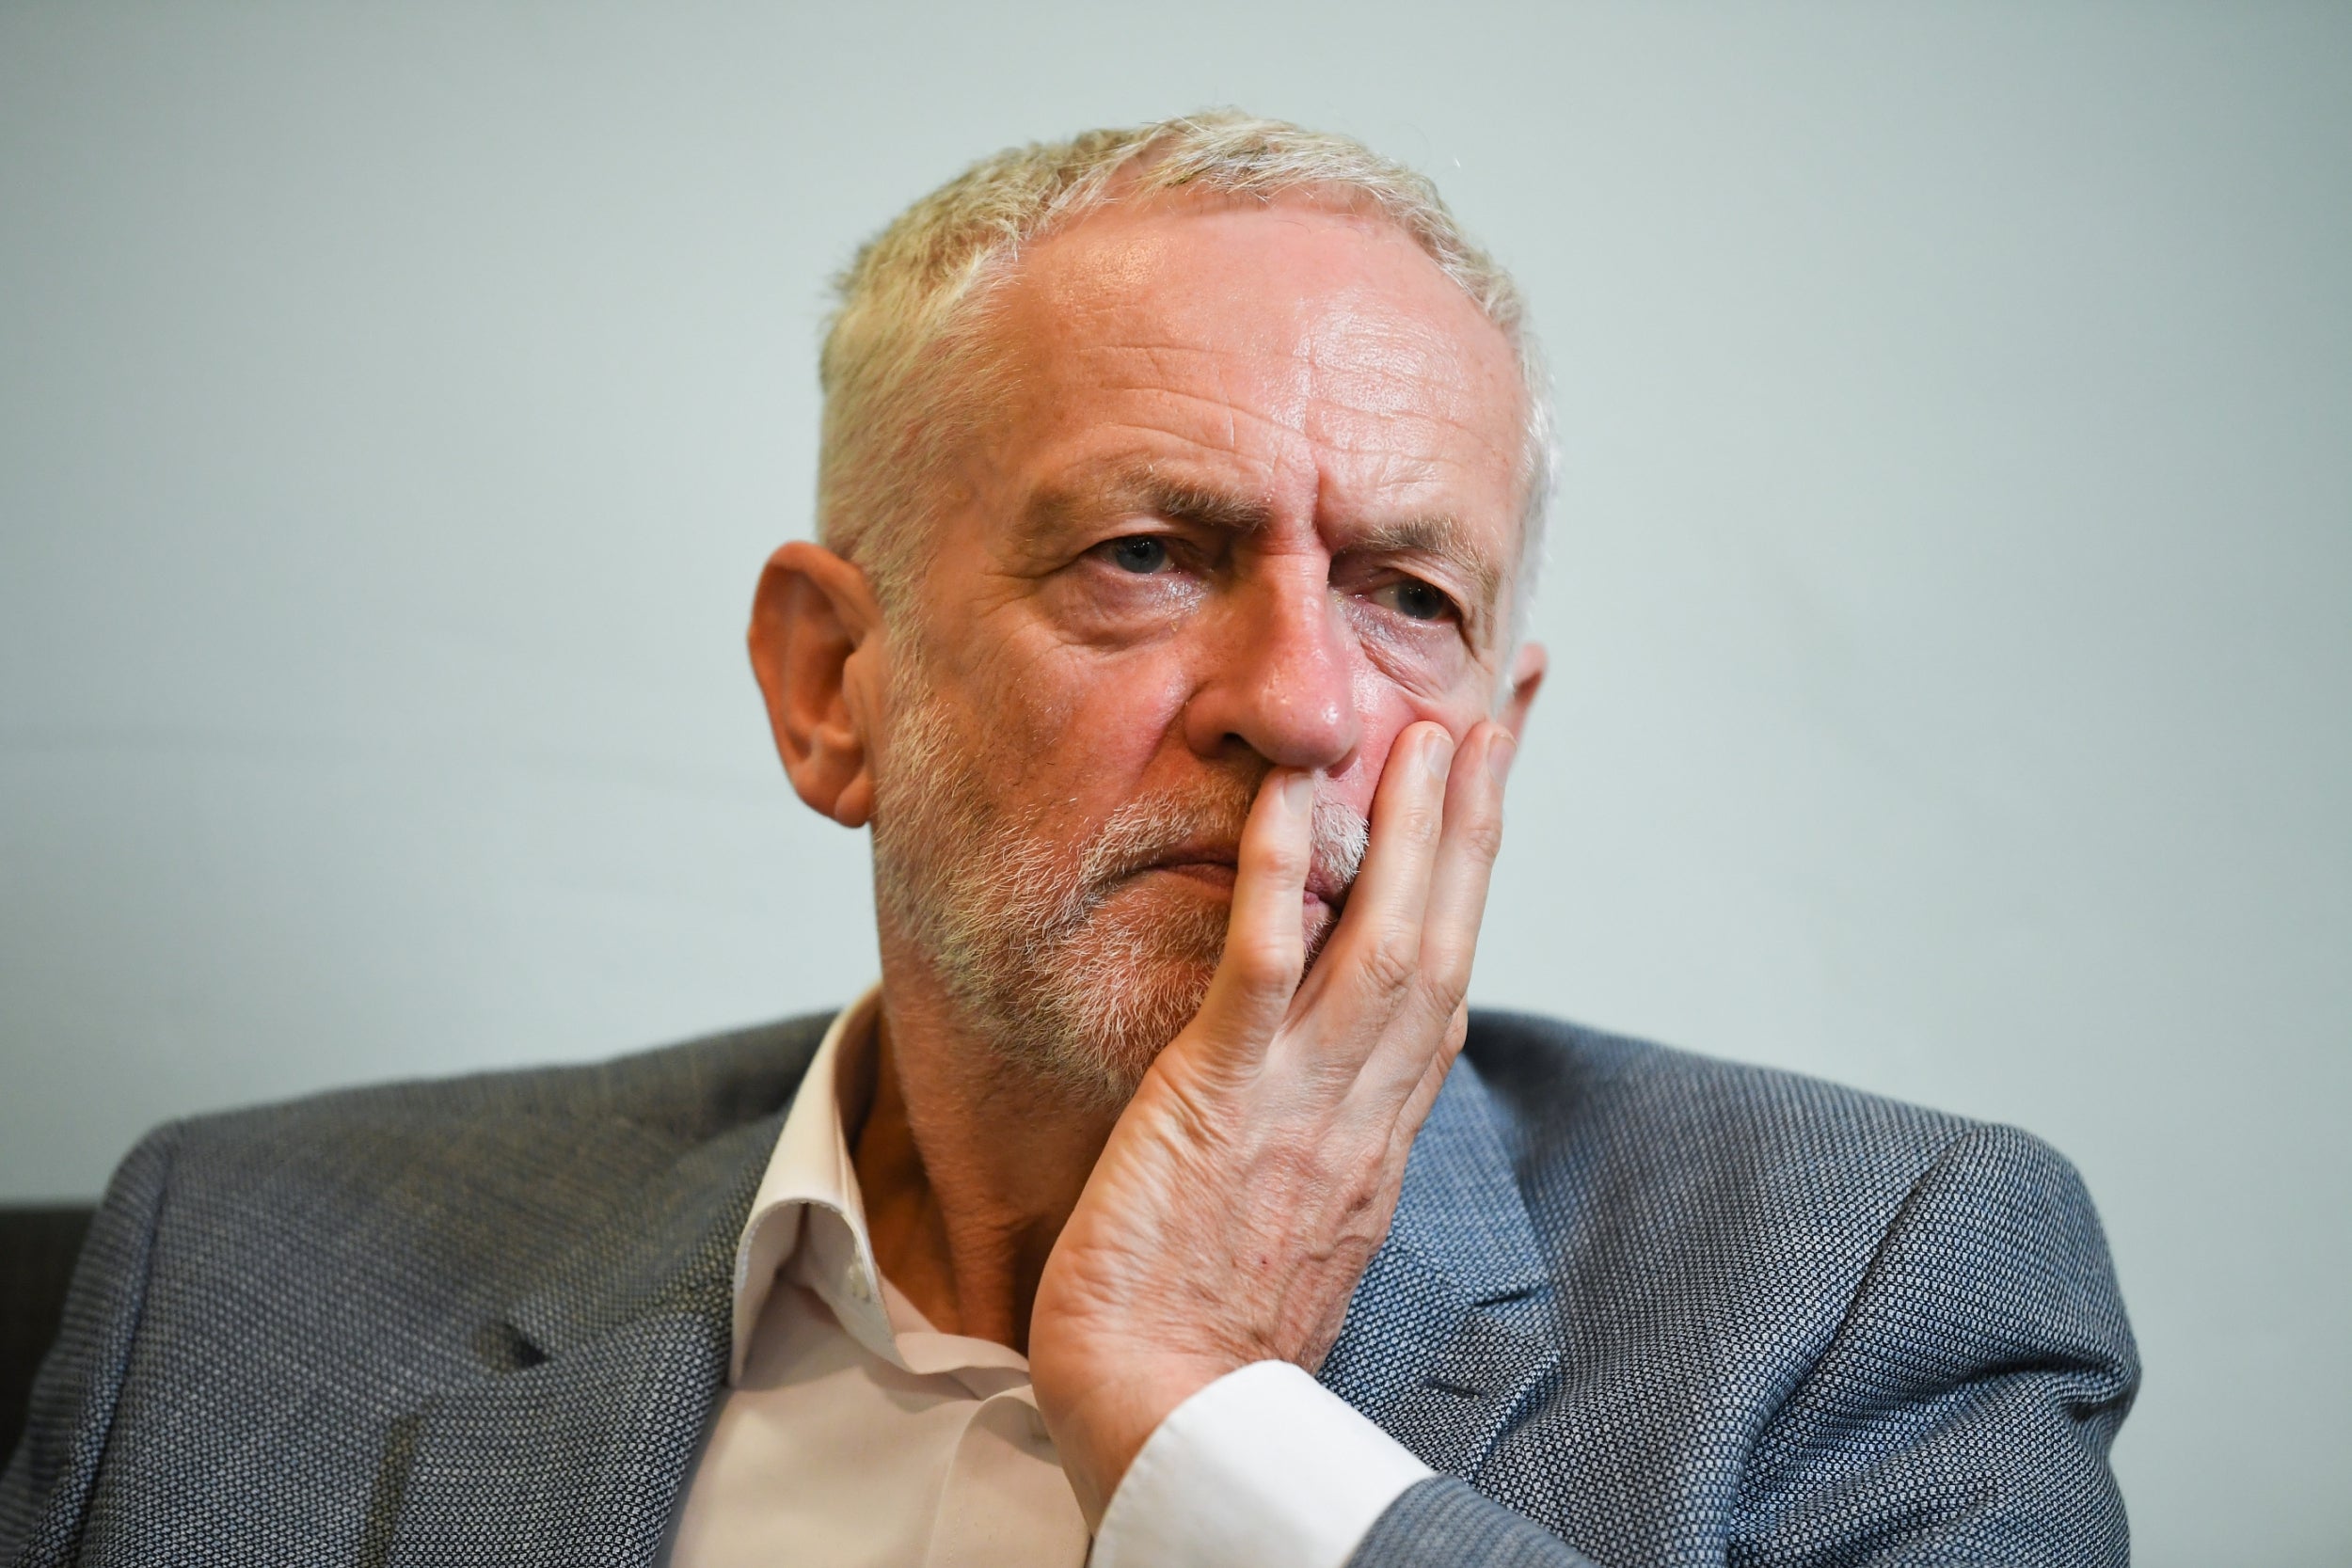 Allies of Jeremy Corbyn want to make it easier for a left-winger candidate to get on the leadership ballot in future